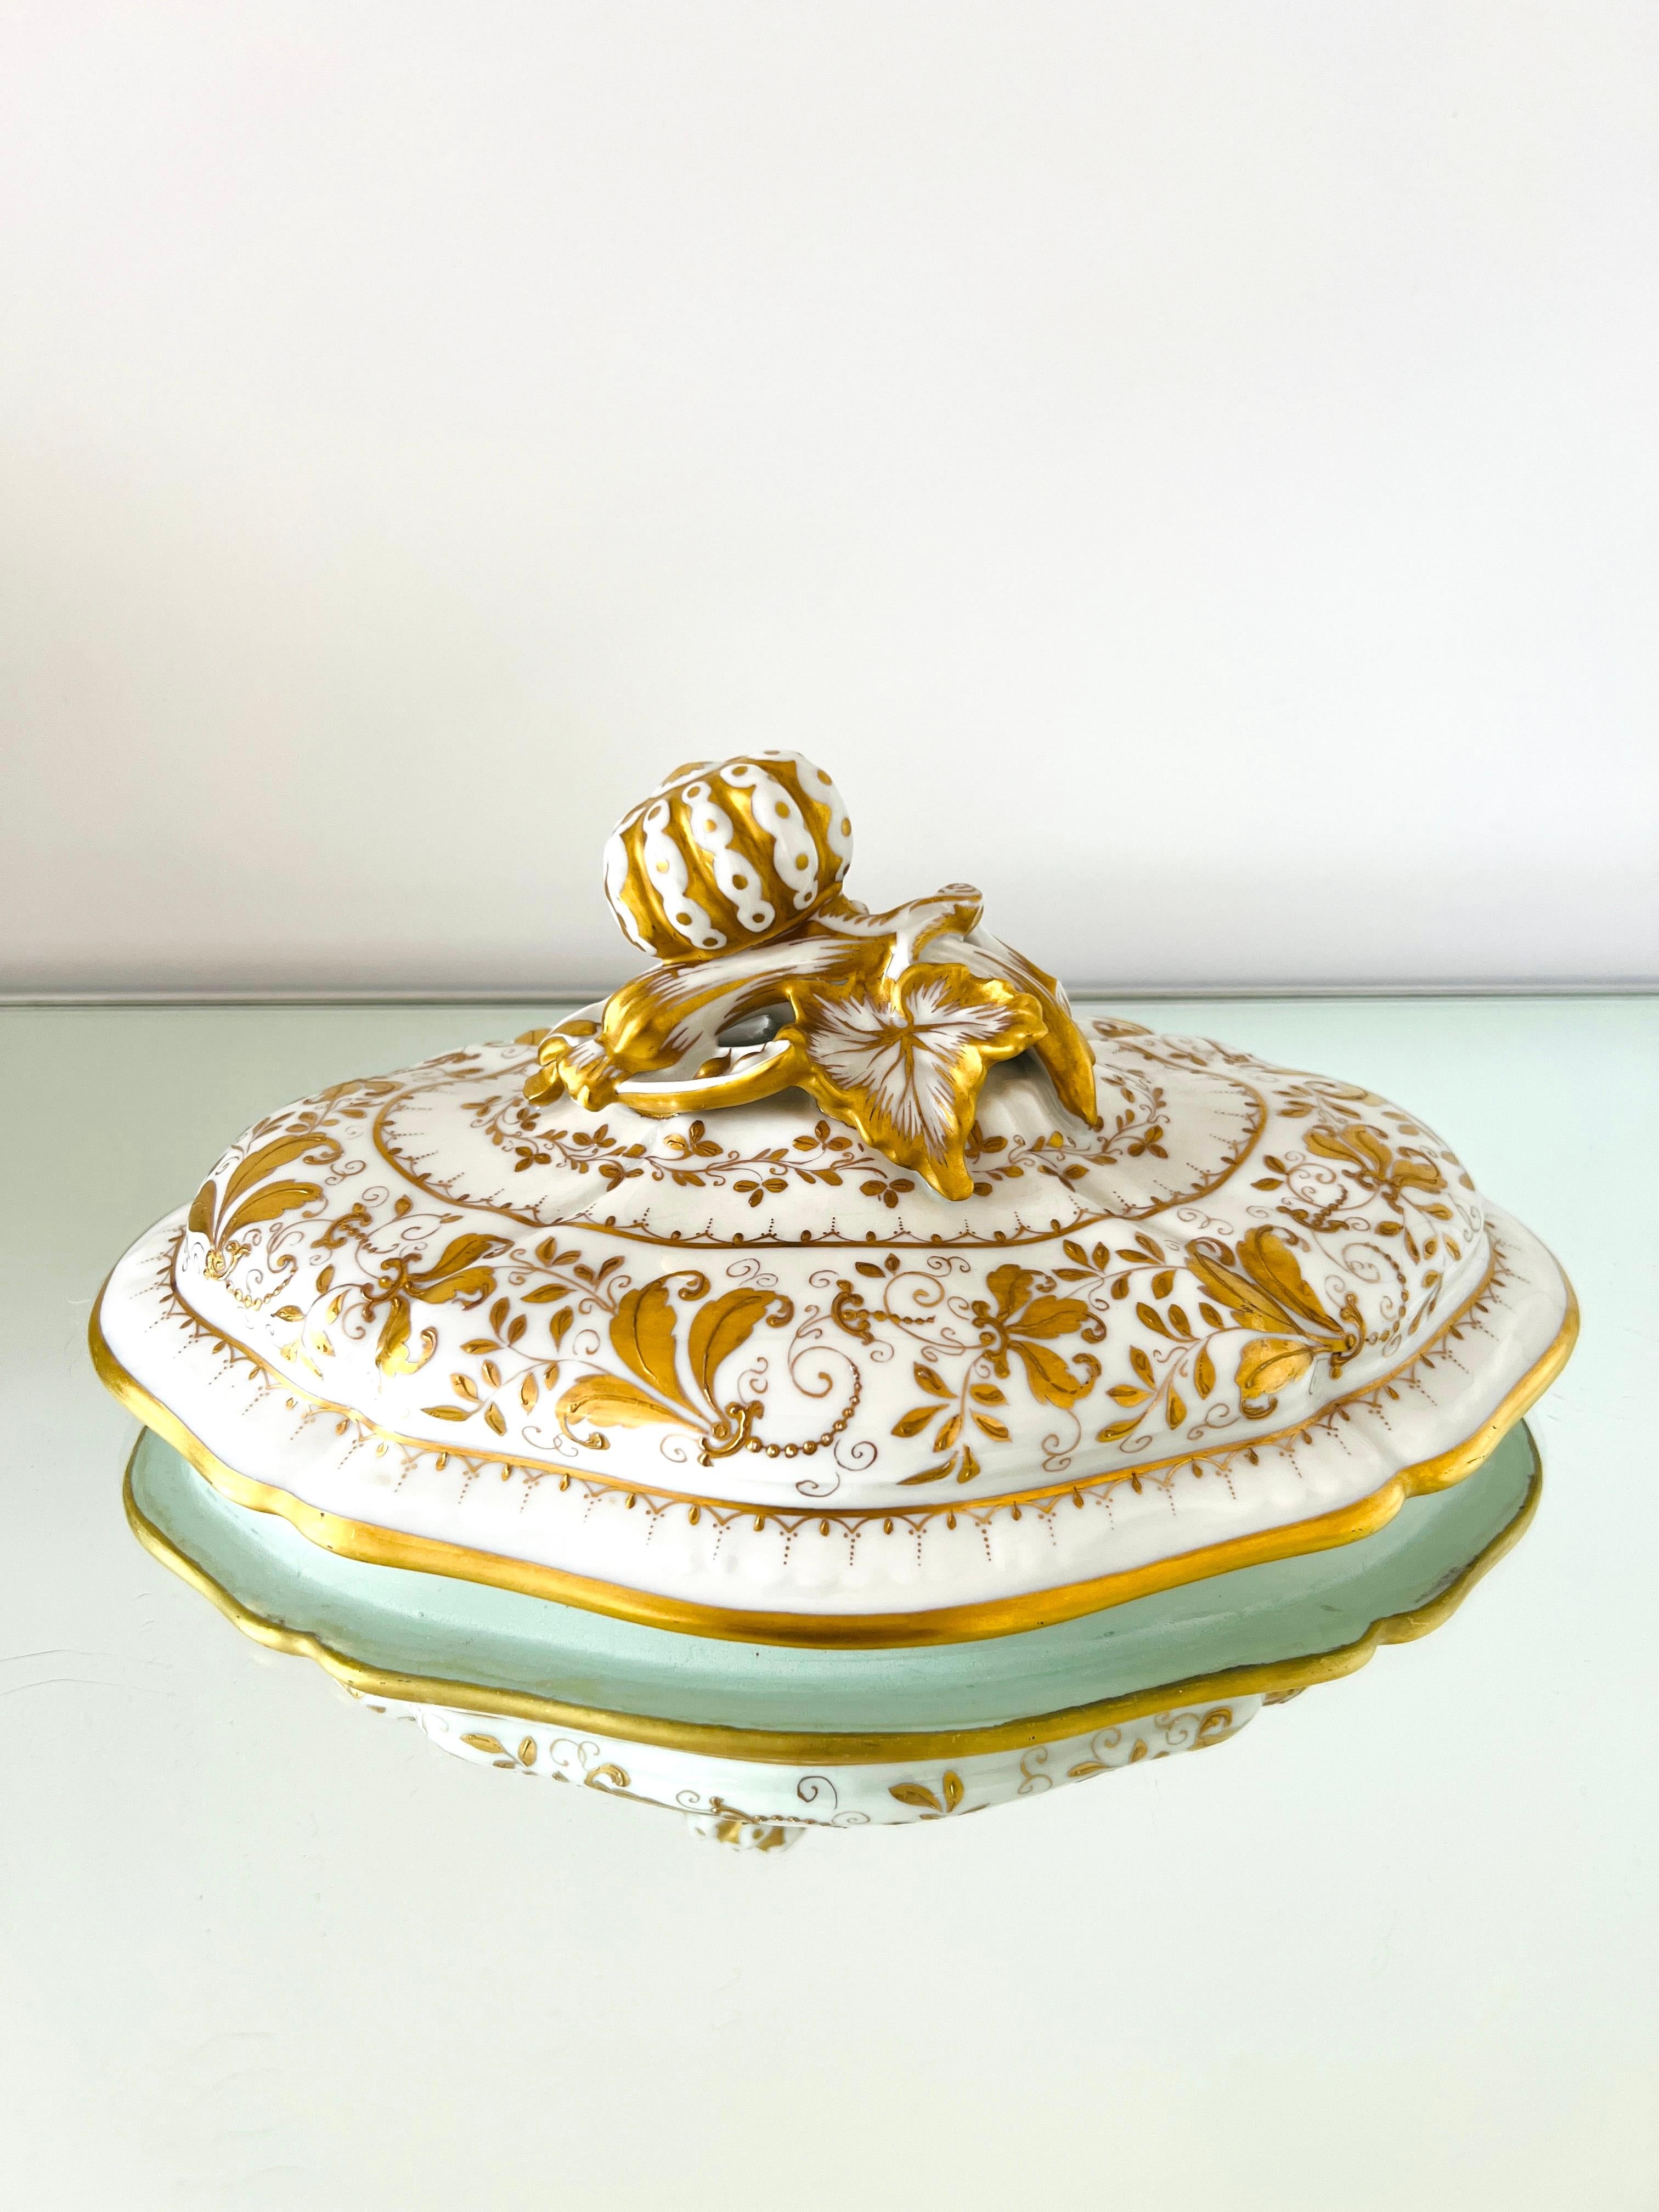 Rococo Le Tallec Hand Painted Porcelain Tureen with Gold Leaf Motifs, Paris, circa 1960 For Sale